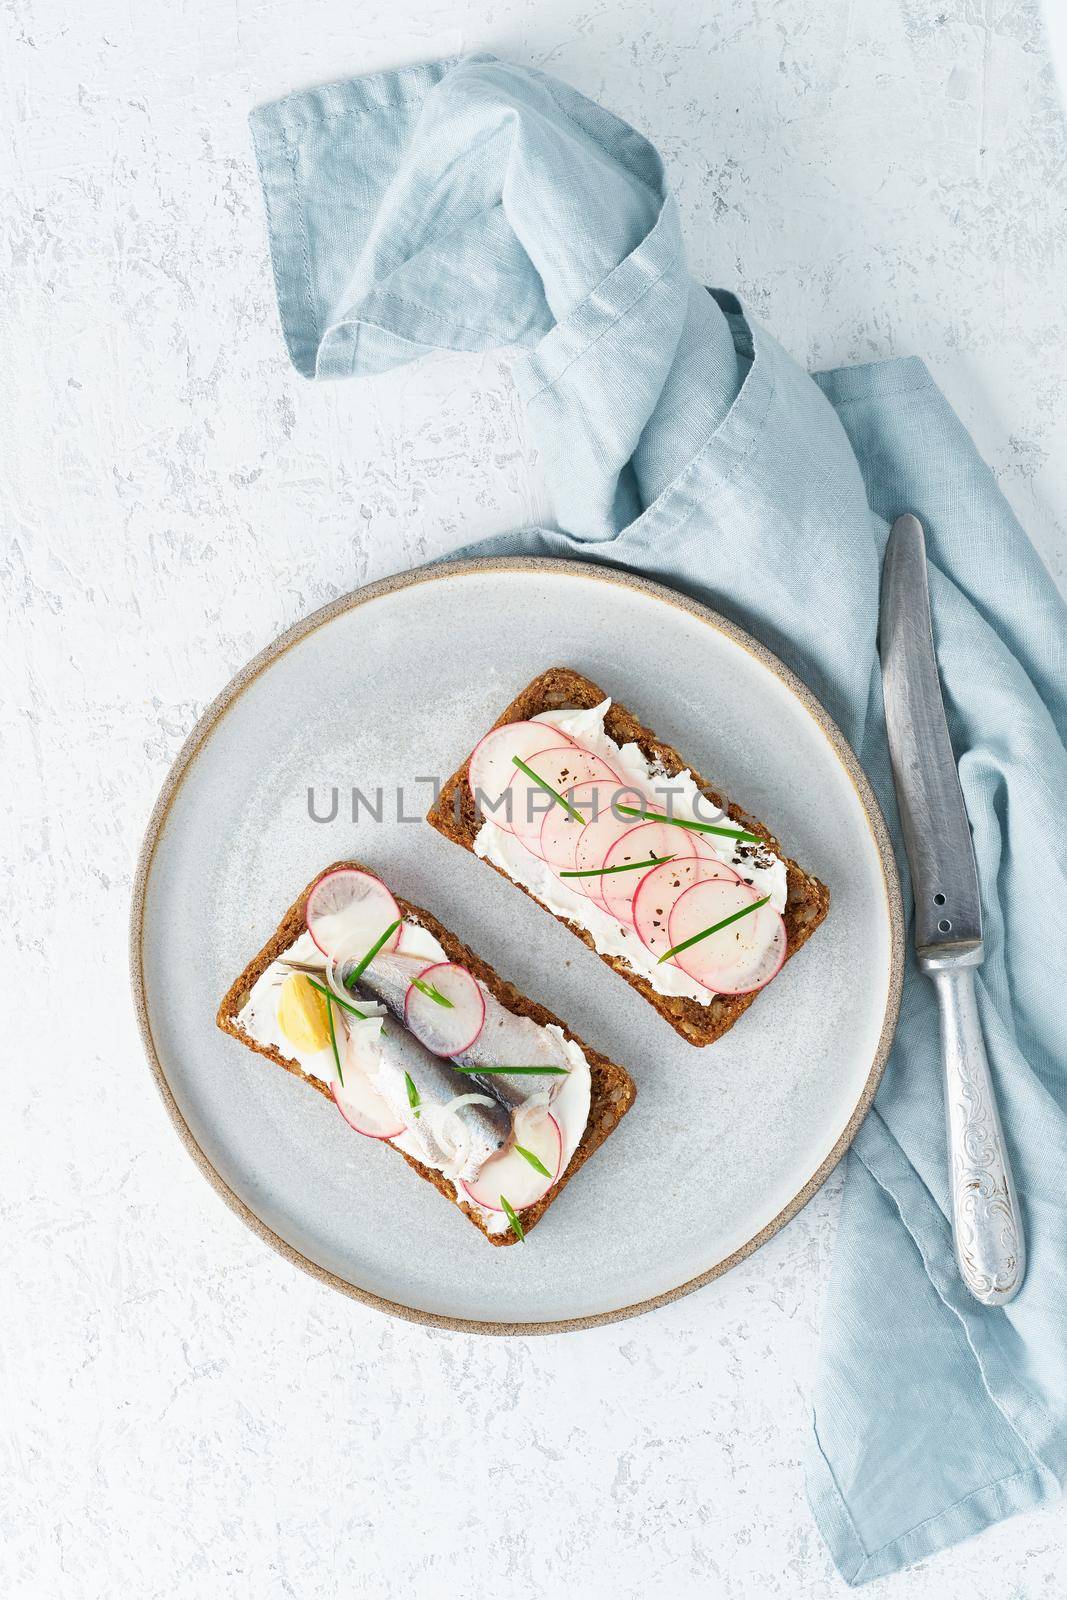 Savory smorrebrod, two traditional Danish sandwiches. Black rye bread with anchovy, radish, eggs, cream cheese on a grey plate on white stone table, vertical, top view